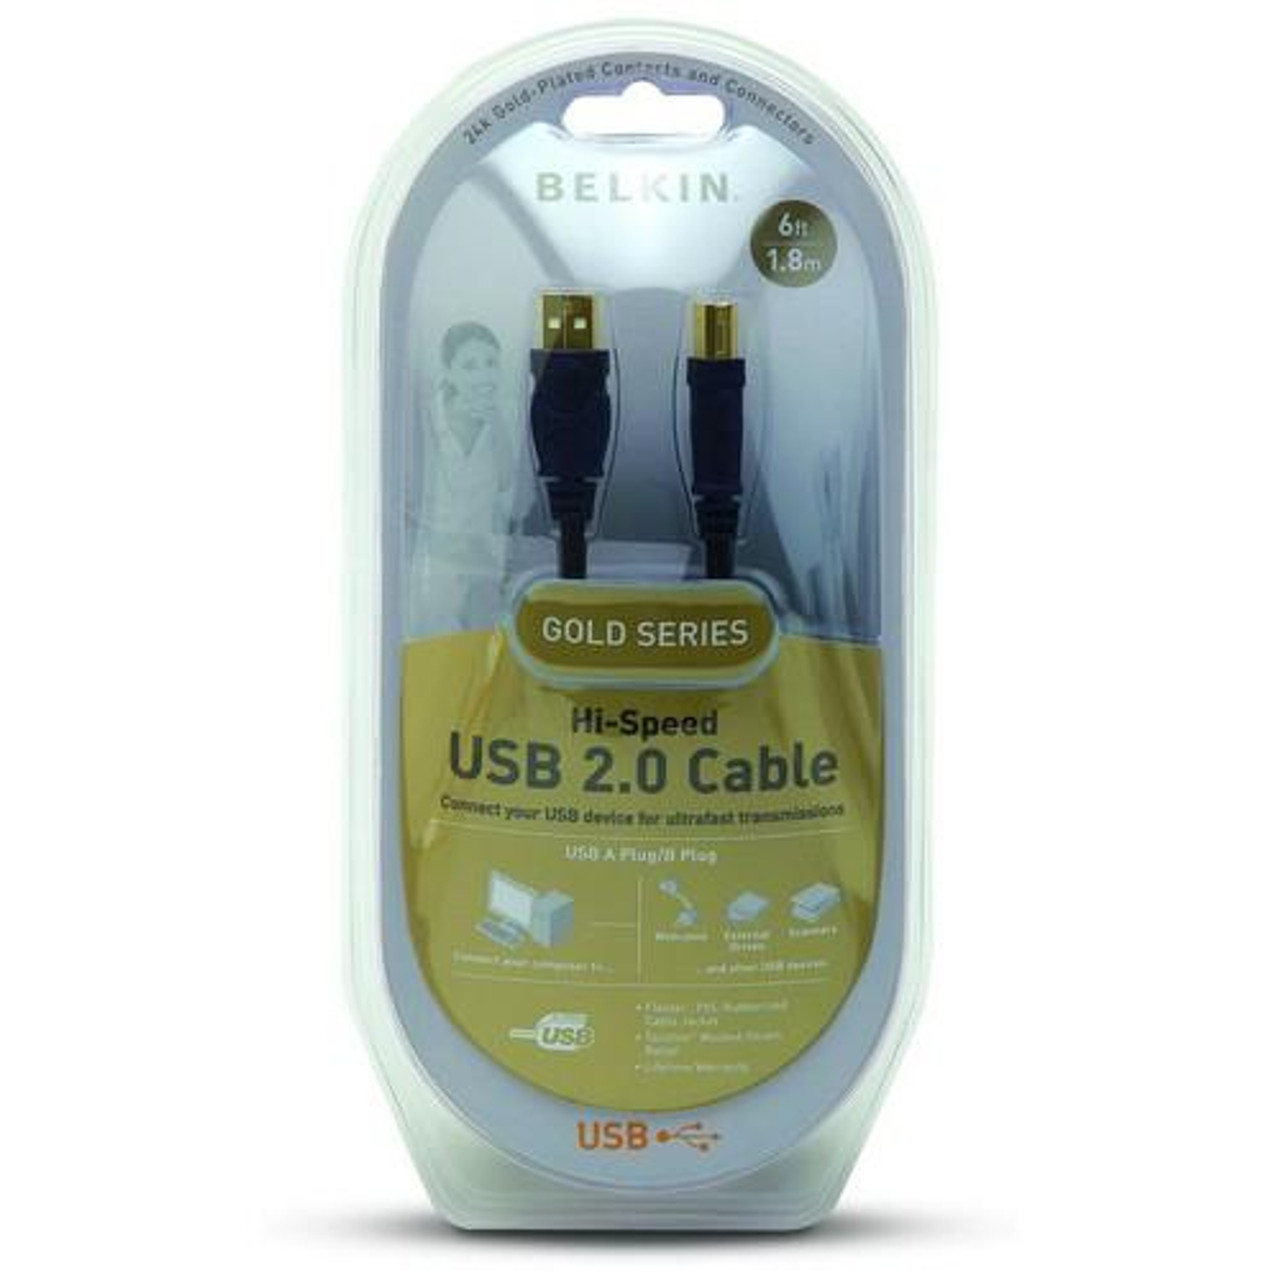 Belkin Pro Series High-Speed USB 2.0 Cable BLKF3U133V06